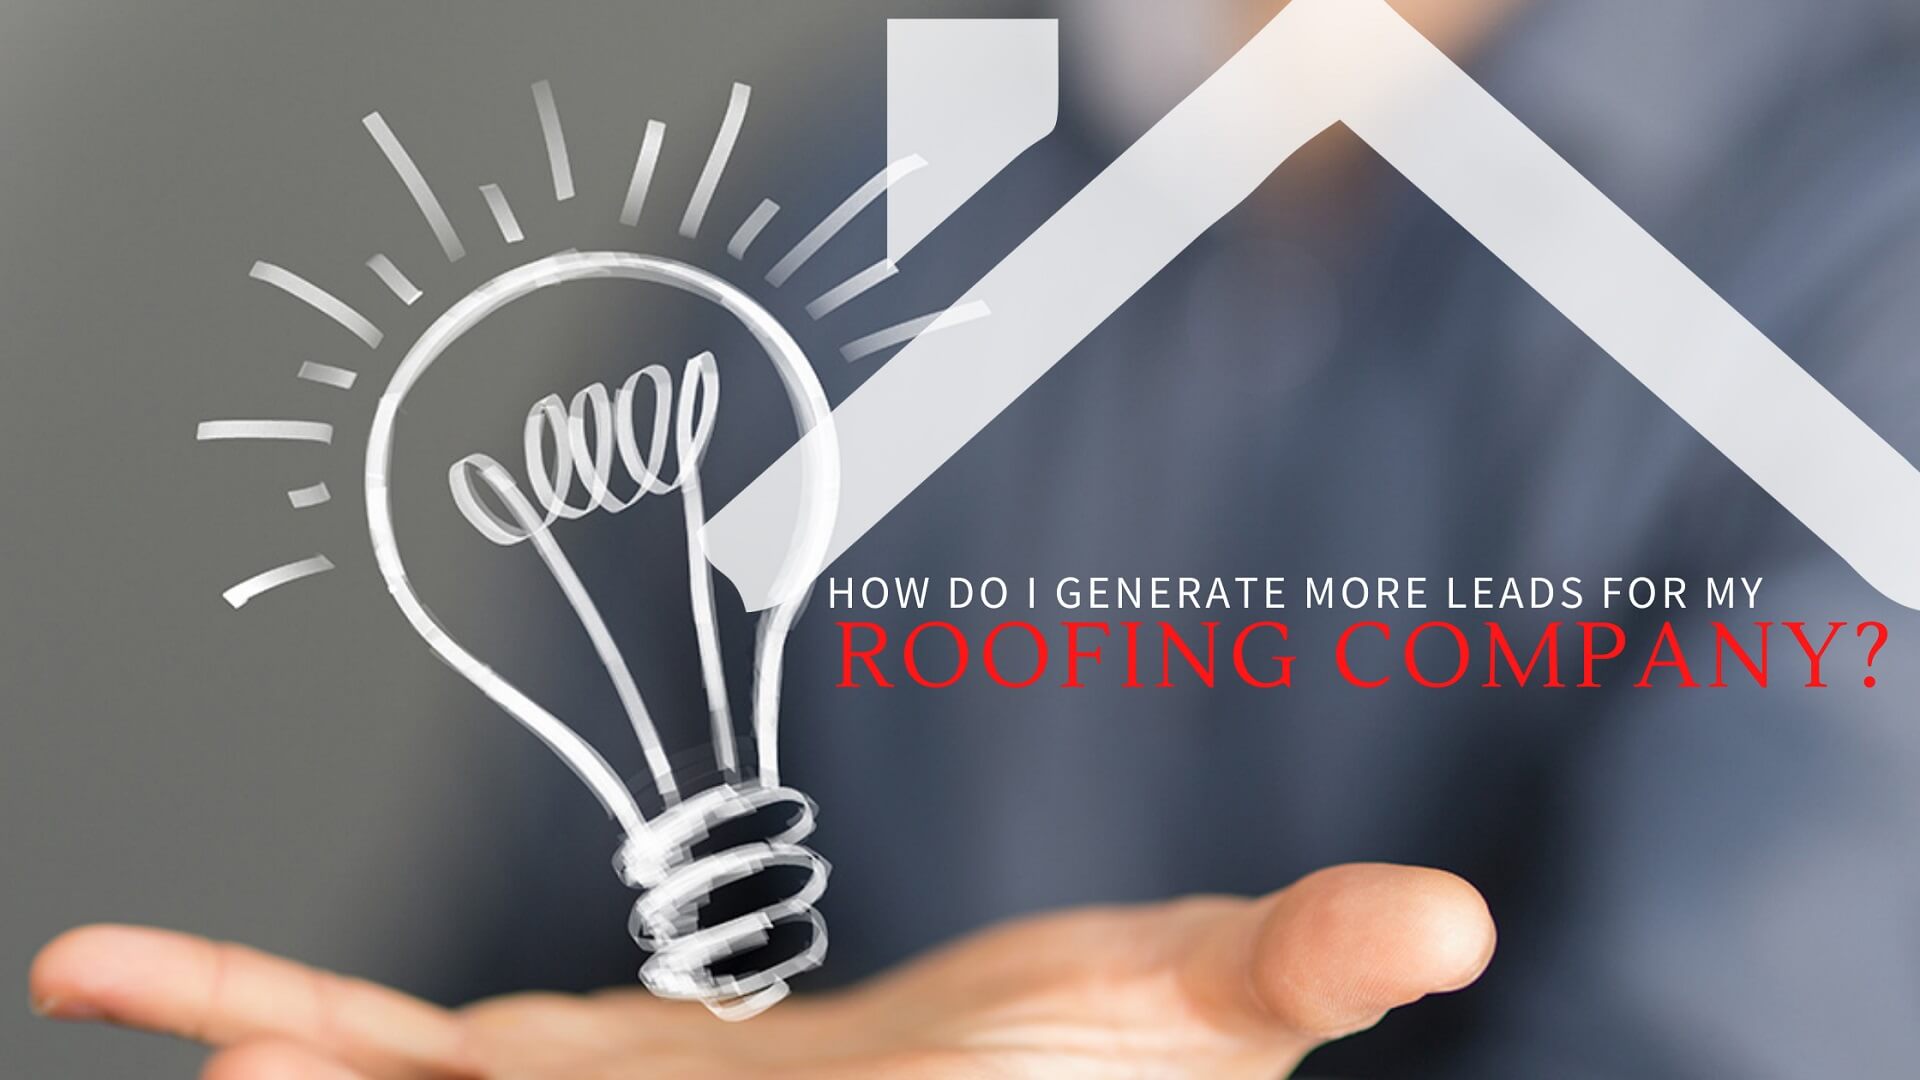 How_do_I generate more_leads for my roofing company